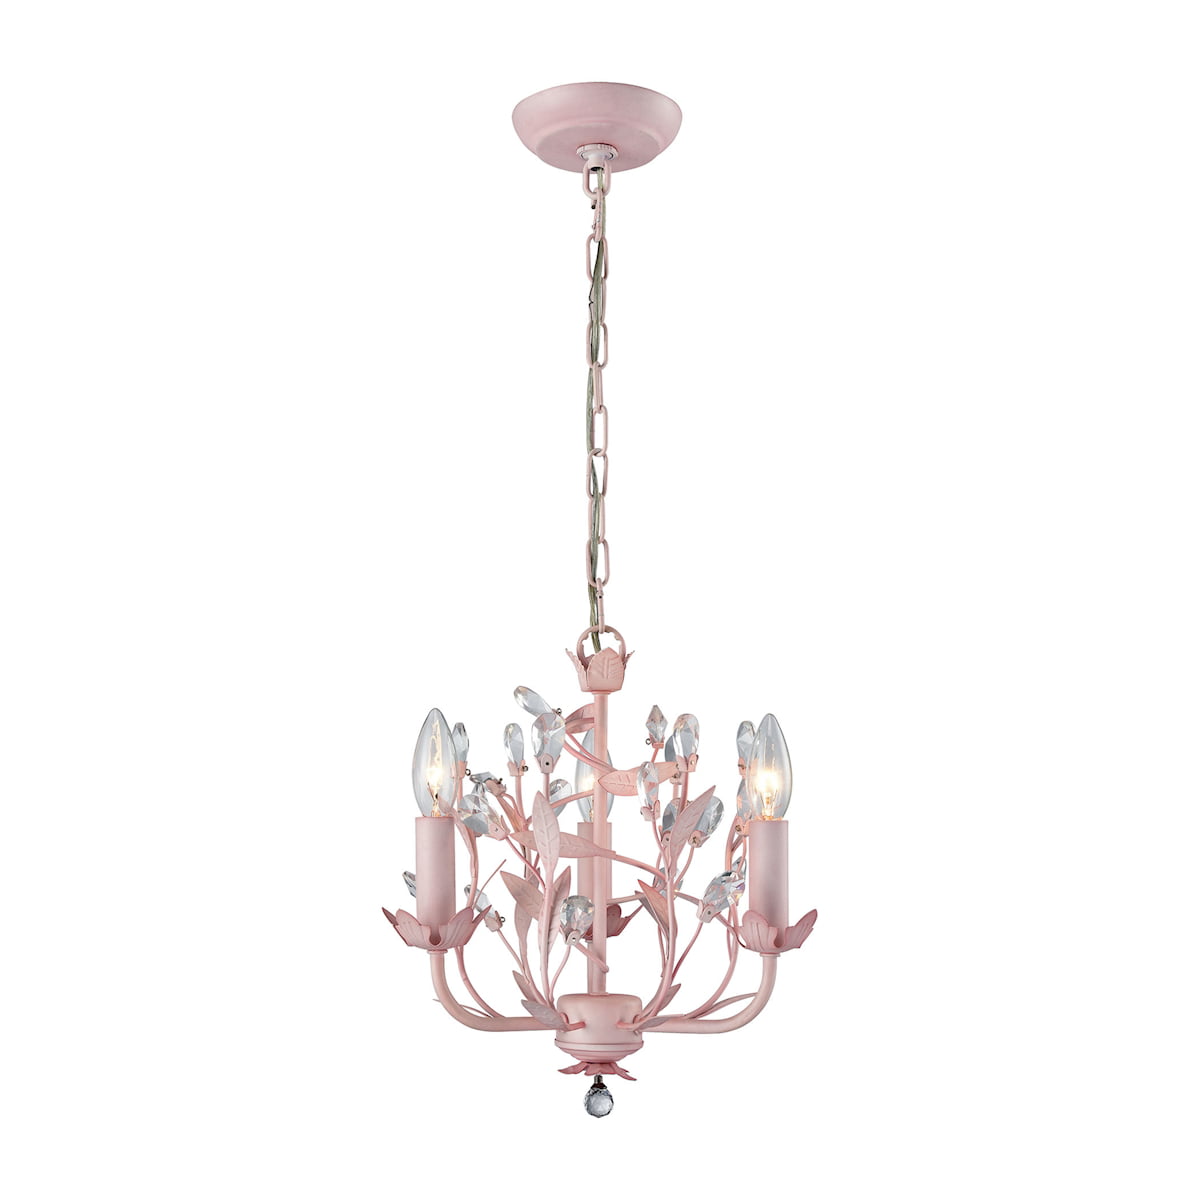 White With Pink Roses And Crystal Accents 5 Light Chandelier 